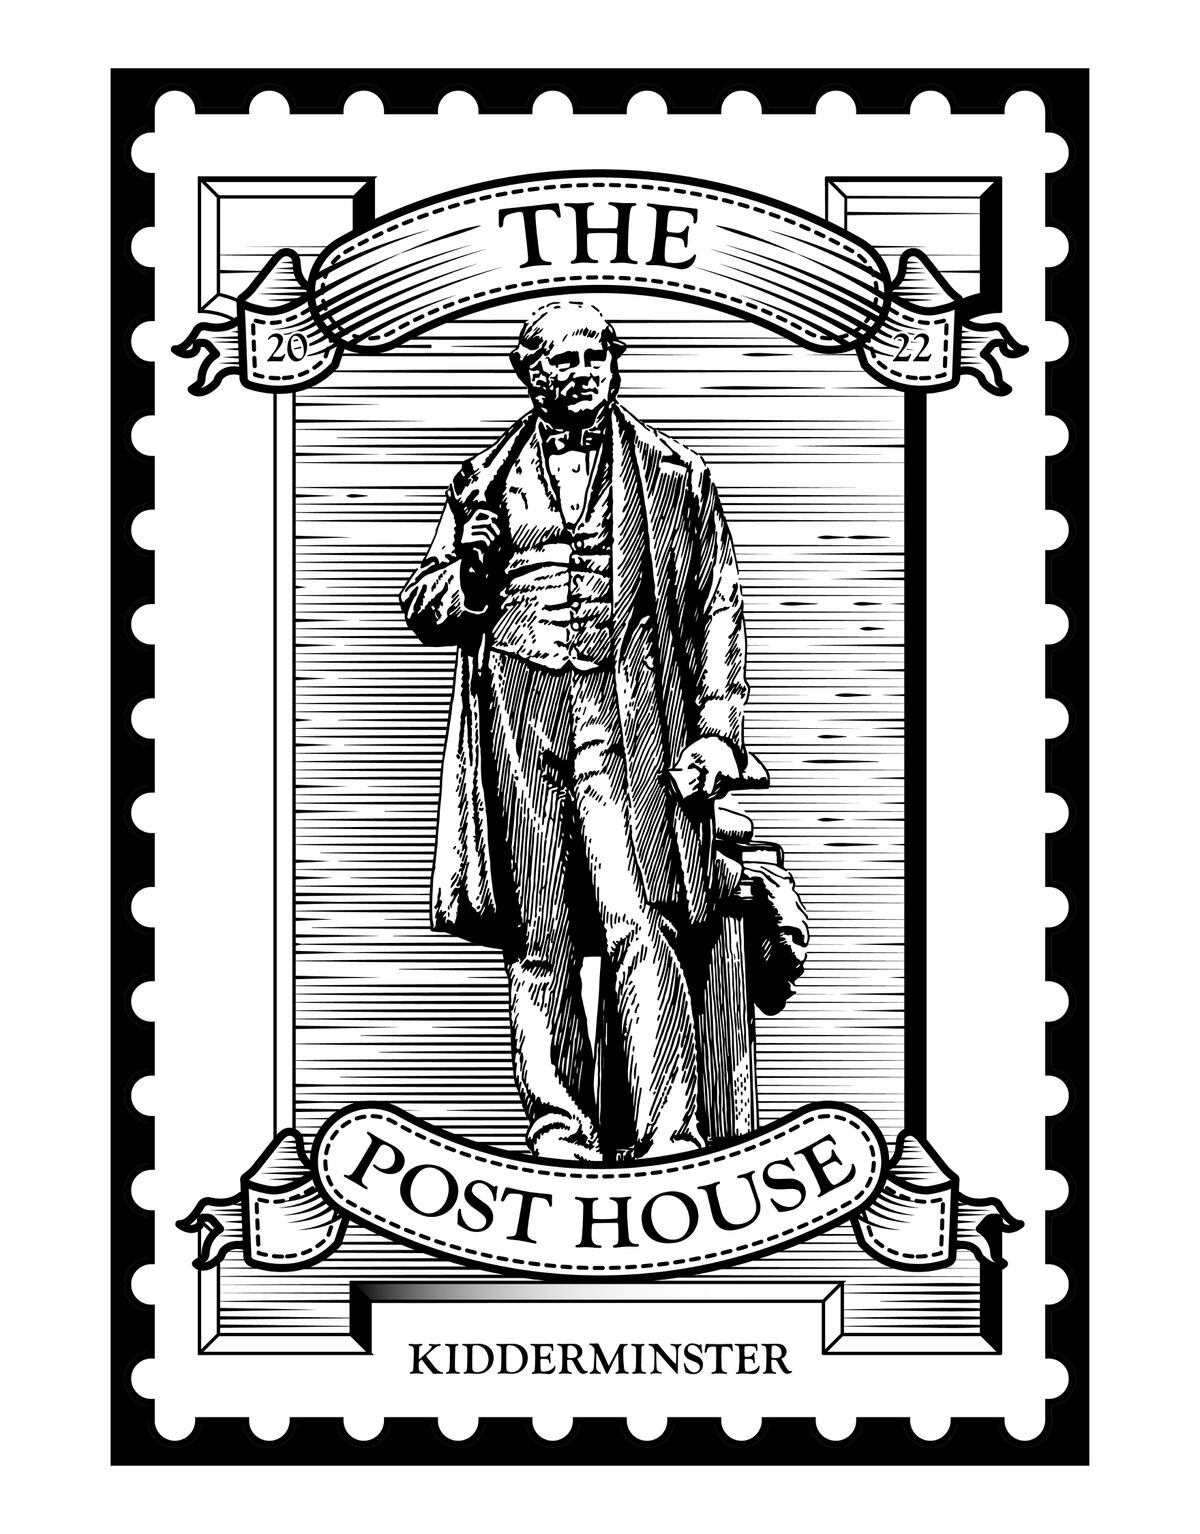 The Post House's new logo